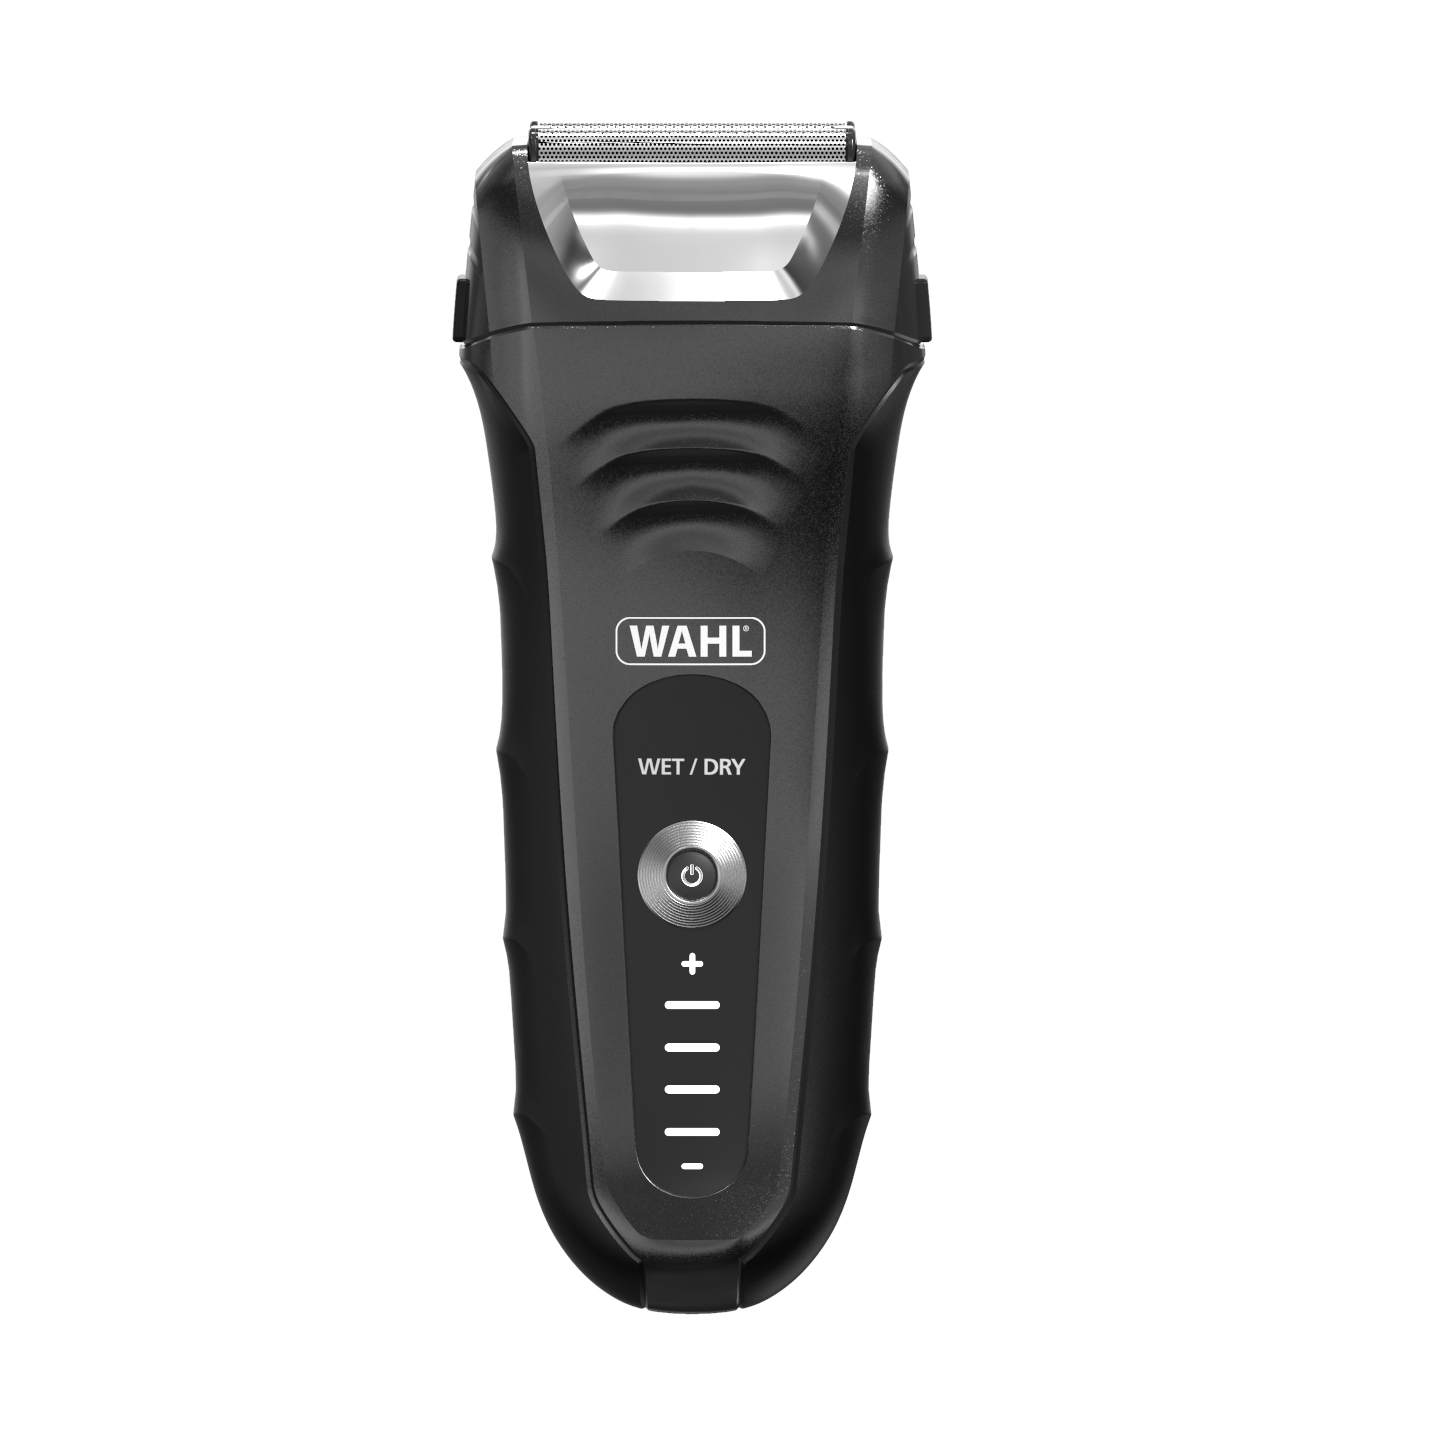 Wahl LifeProof Foil Shaver for Men, Electric Shaver, Rechargeable  WaterProof Wet/Dry #7061-100 